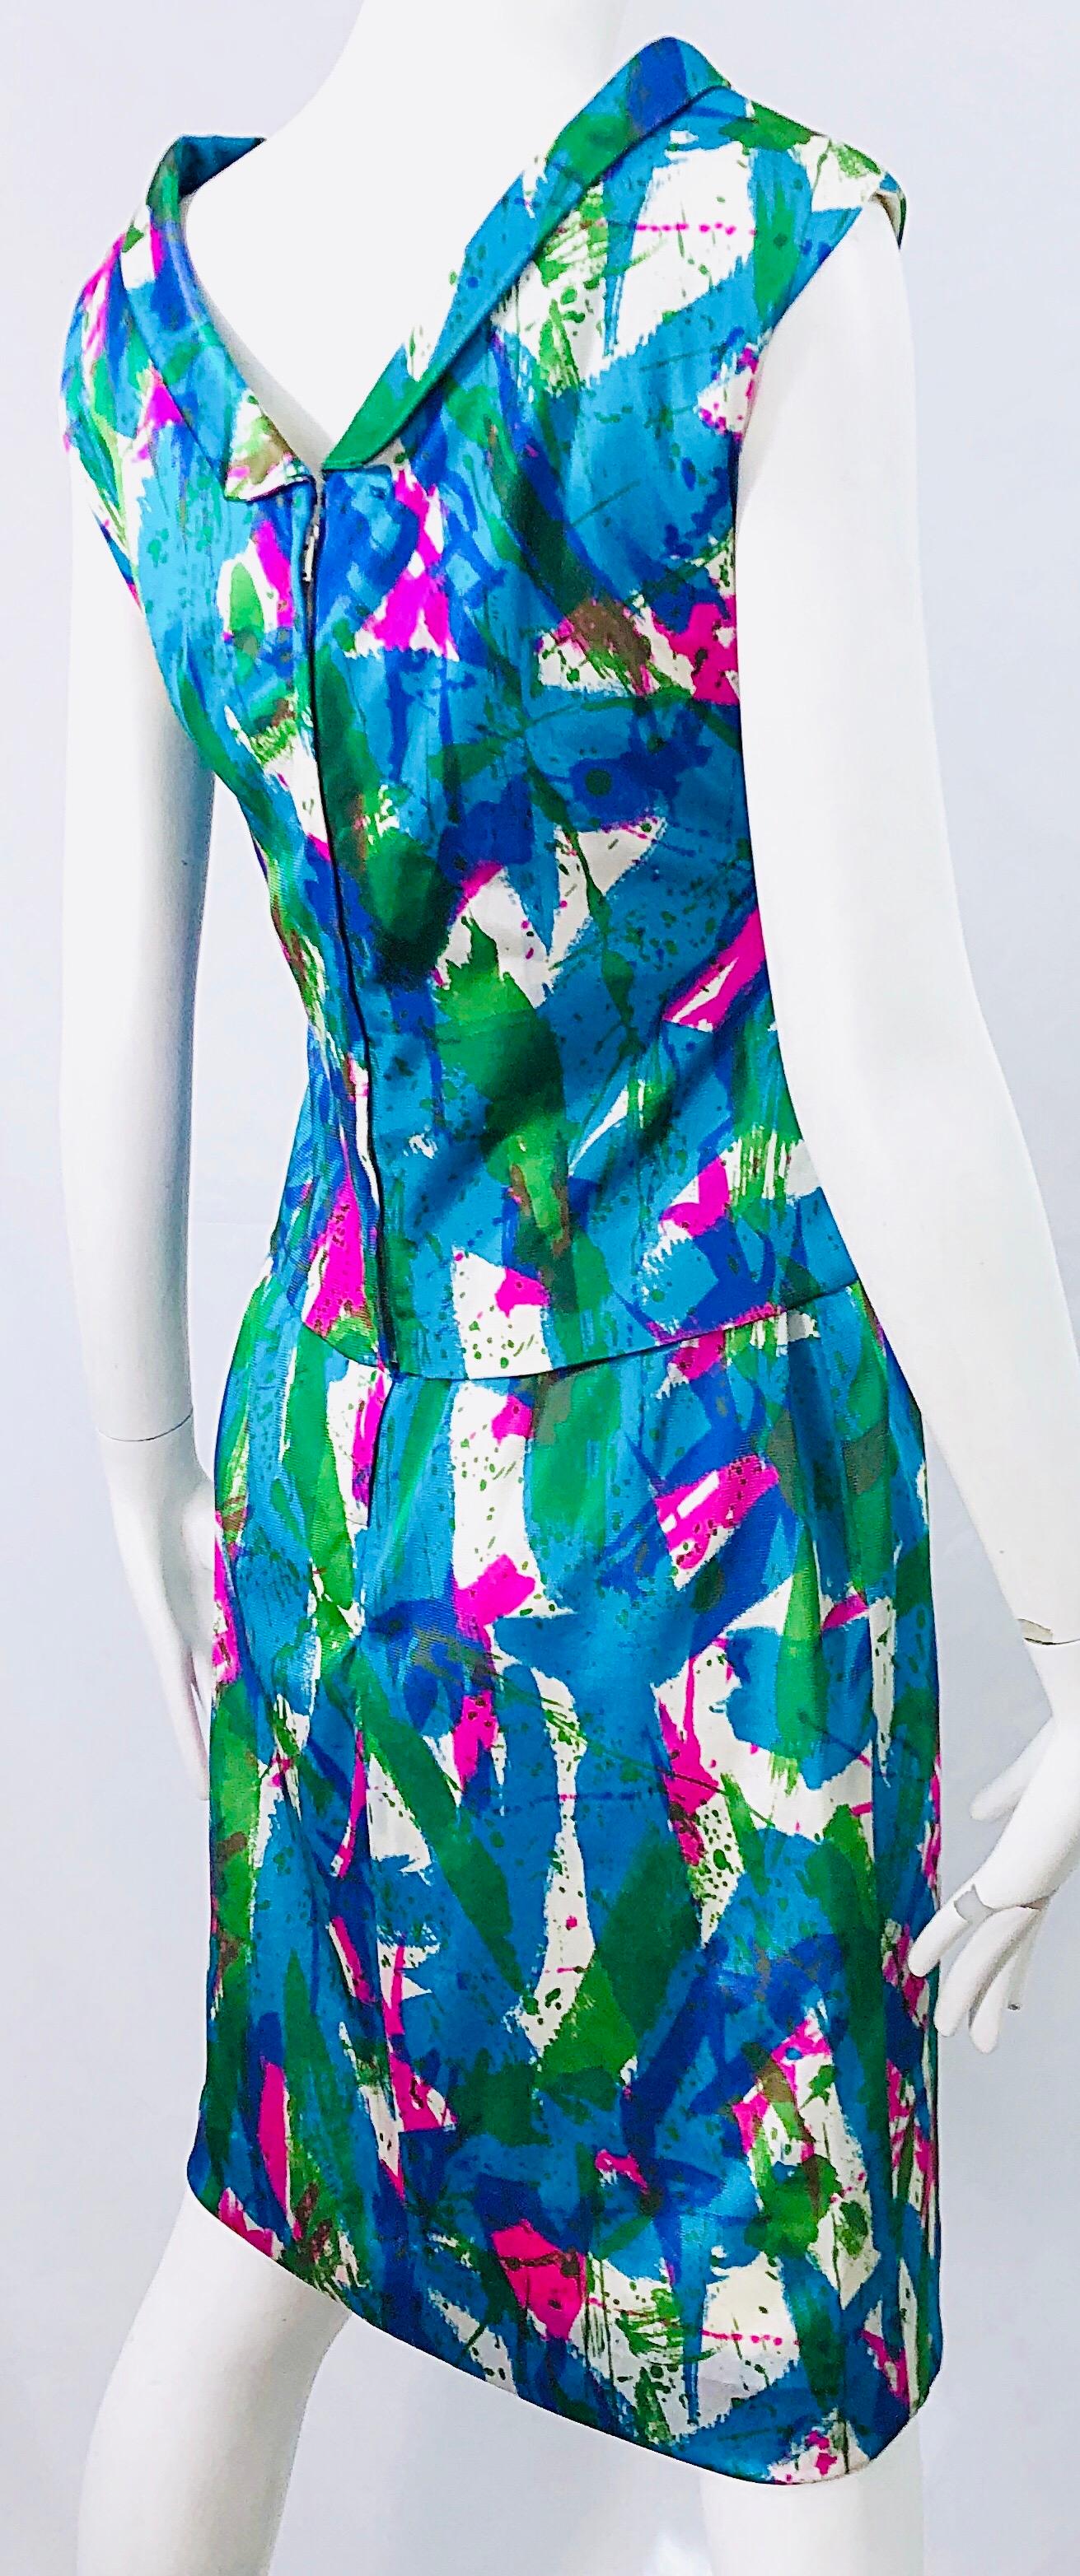 Chic 1960s Neon Abstract Print Two Piece Vintage 60s Sheath Dress + Top Blouse  For Sale 5